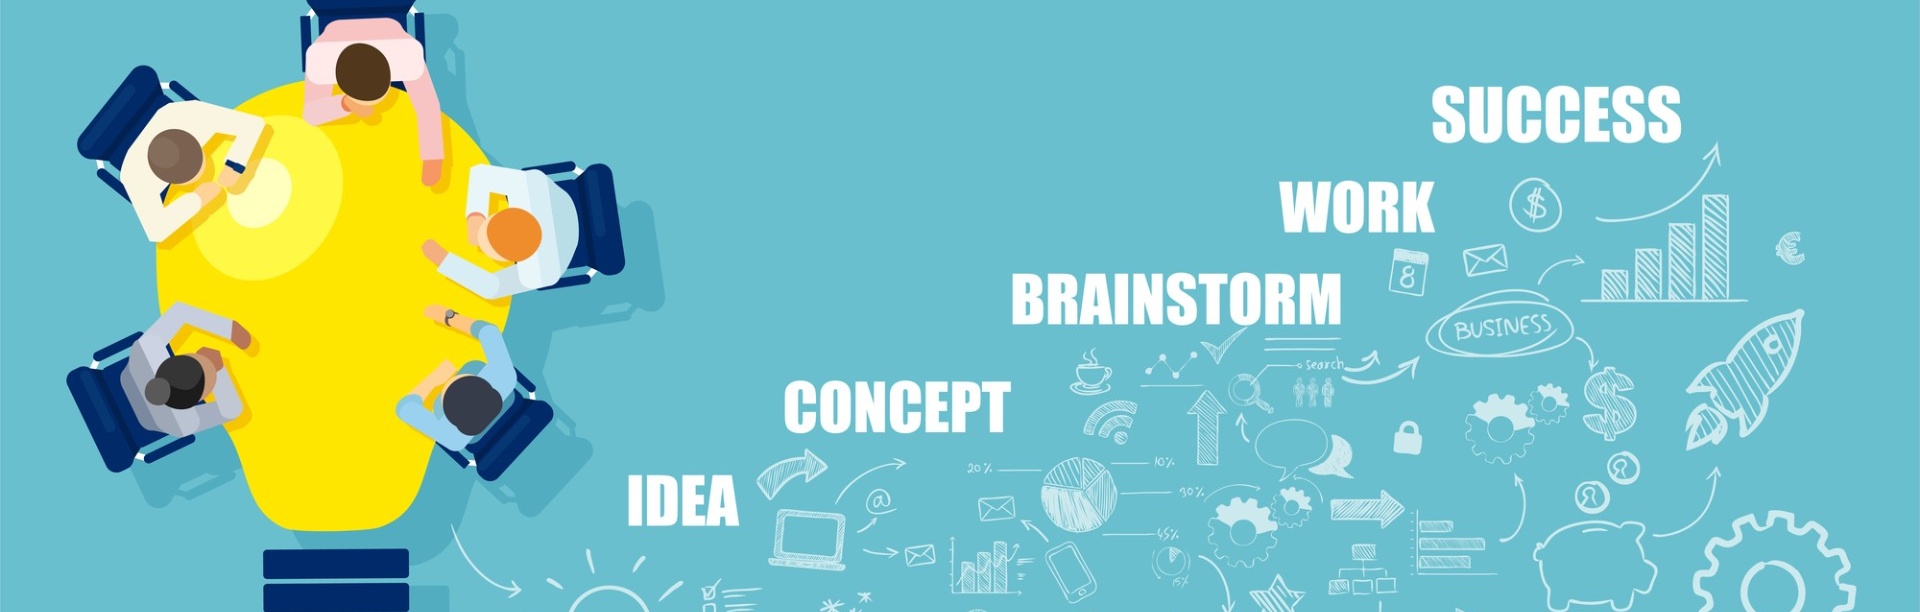 Teal blue background with a graphic portraying a lightbulb as a desk and people sitting around it. The words Idea, Concept, Brainstorm, Work, and Success. 